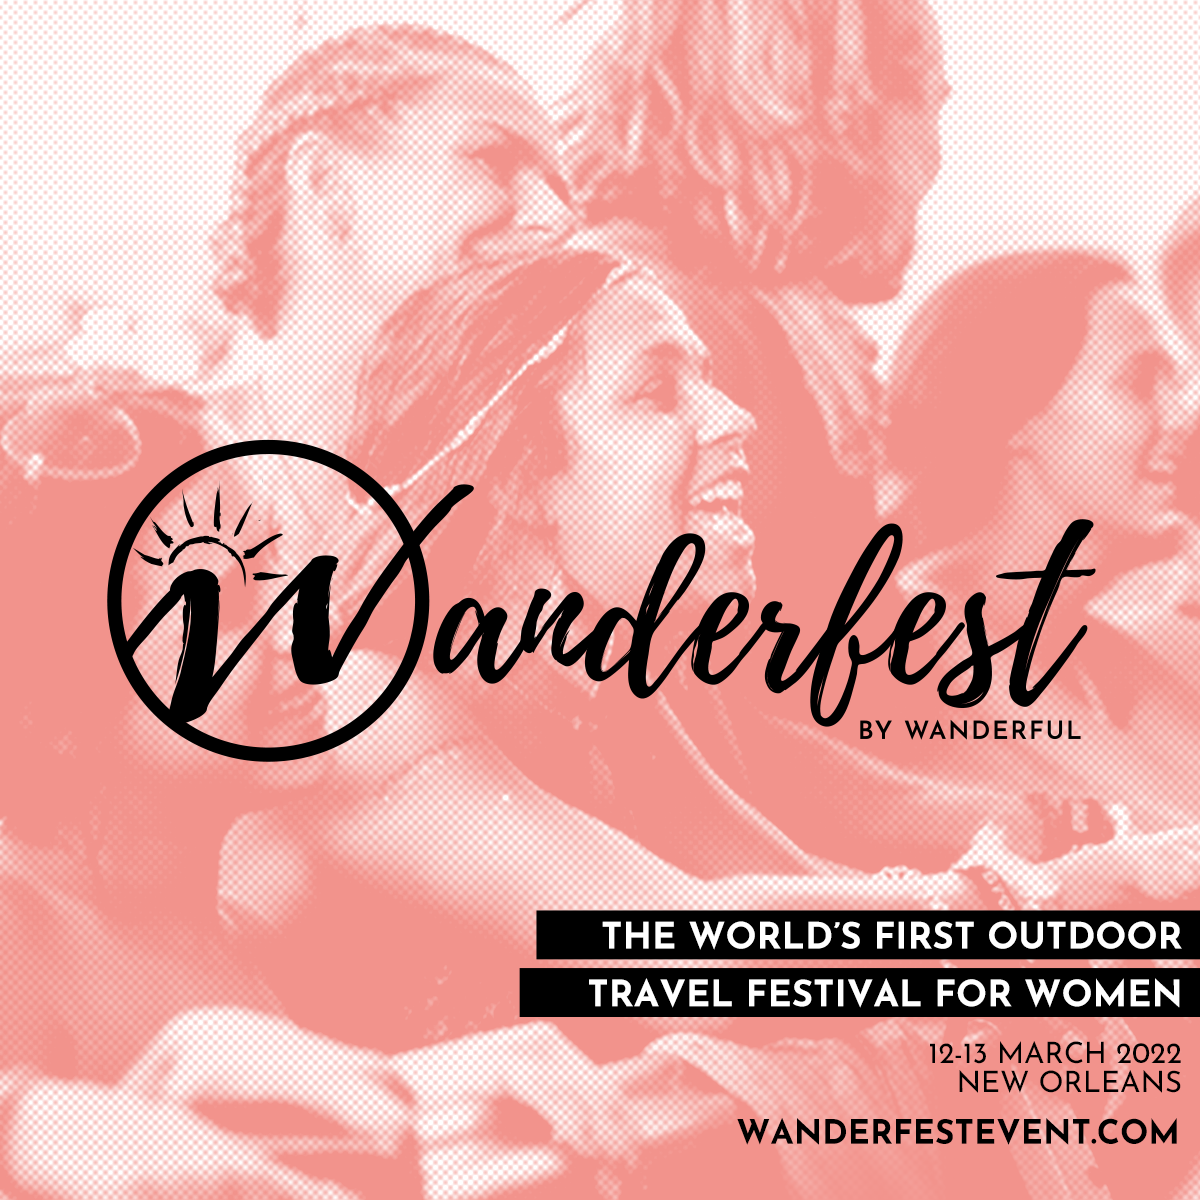 Promotional graphic featuring several happy women at a festival. The image text says: Wanderfest by Wanderful: The world\'s first outdoor travel festival for women. 12-13 March 2022 in New Orleans